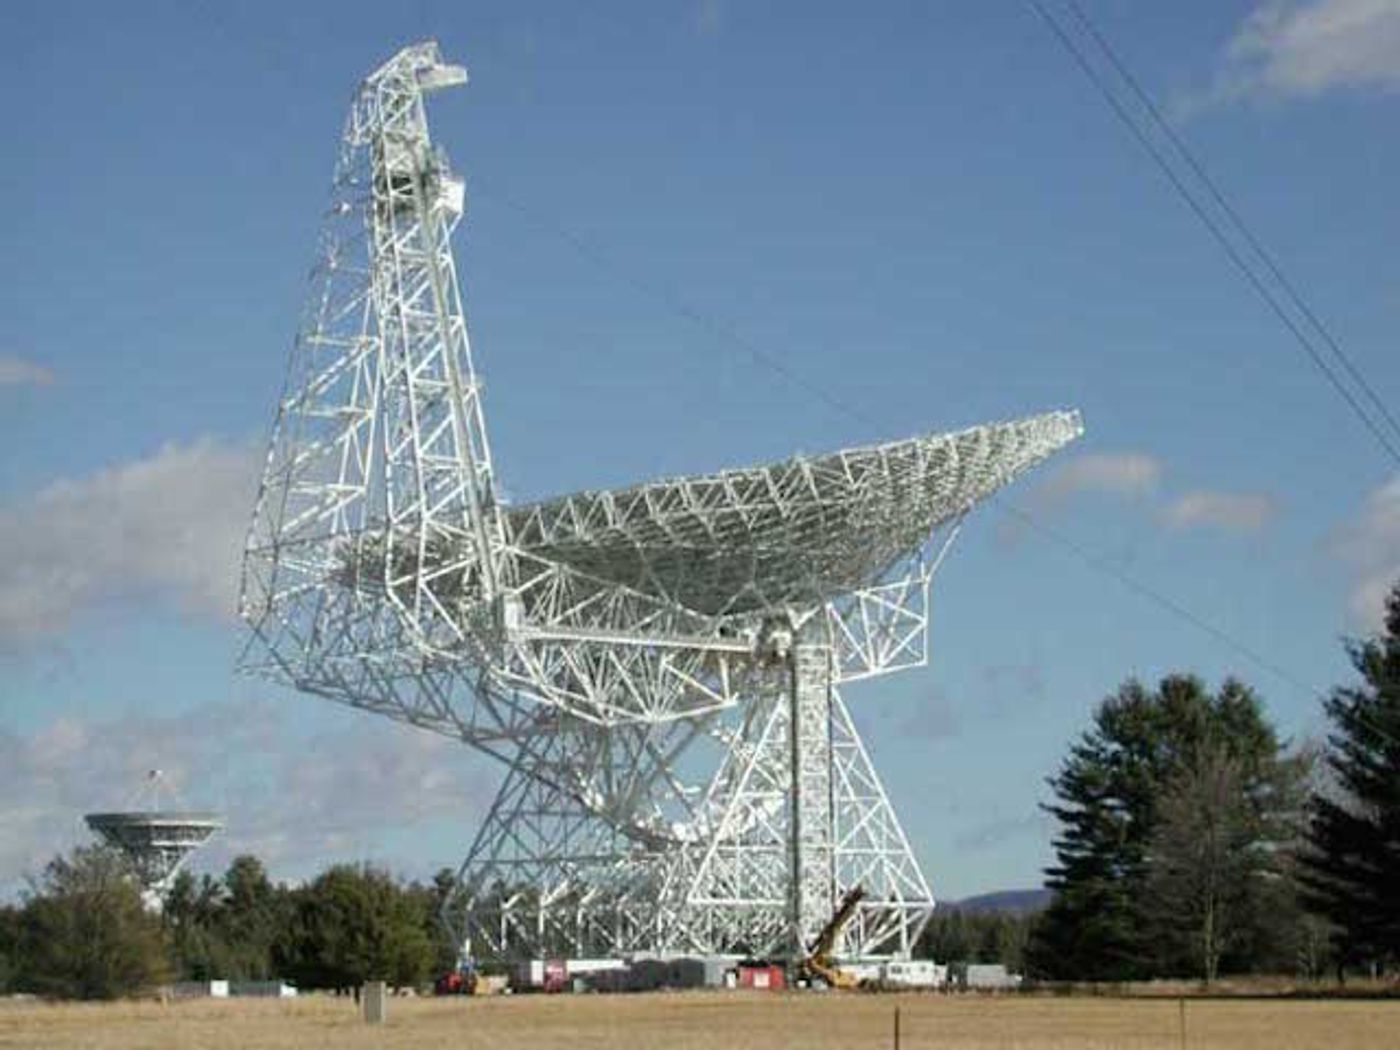 The Robert C Byrd telescope at the Green Bank Radio Observatory